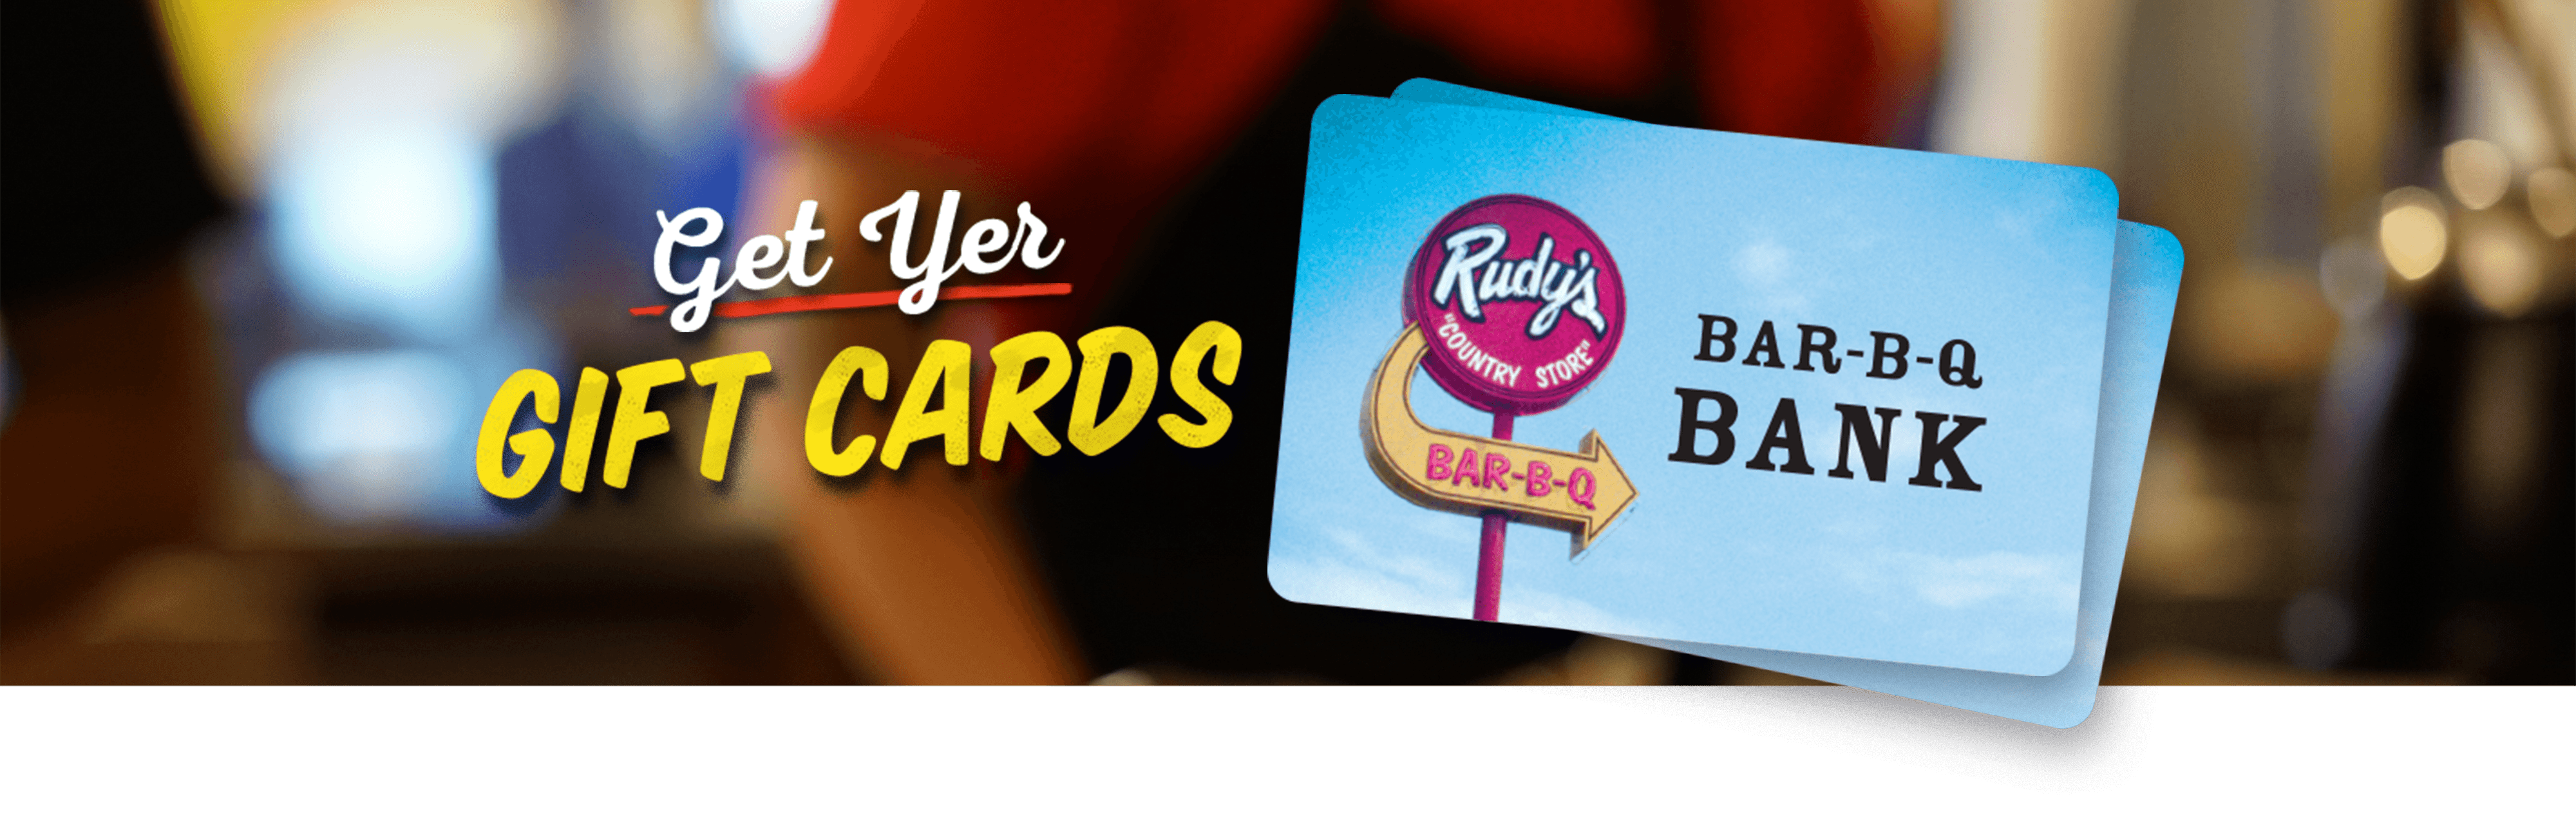 Get your Rudy's gift card!